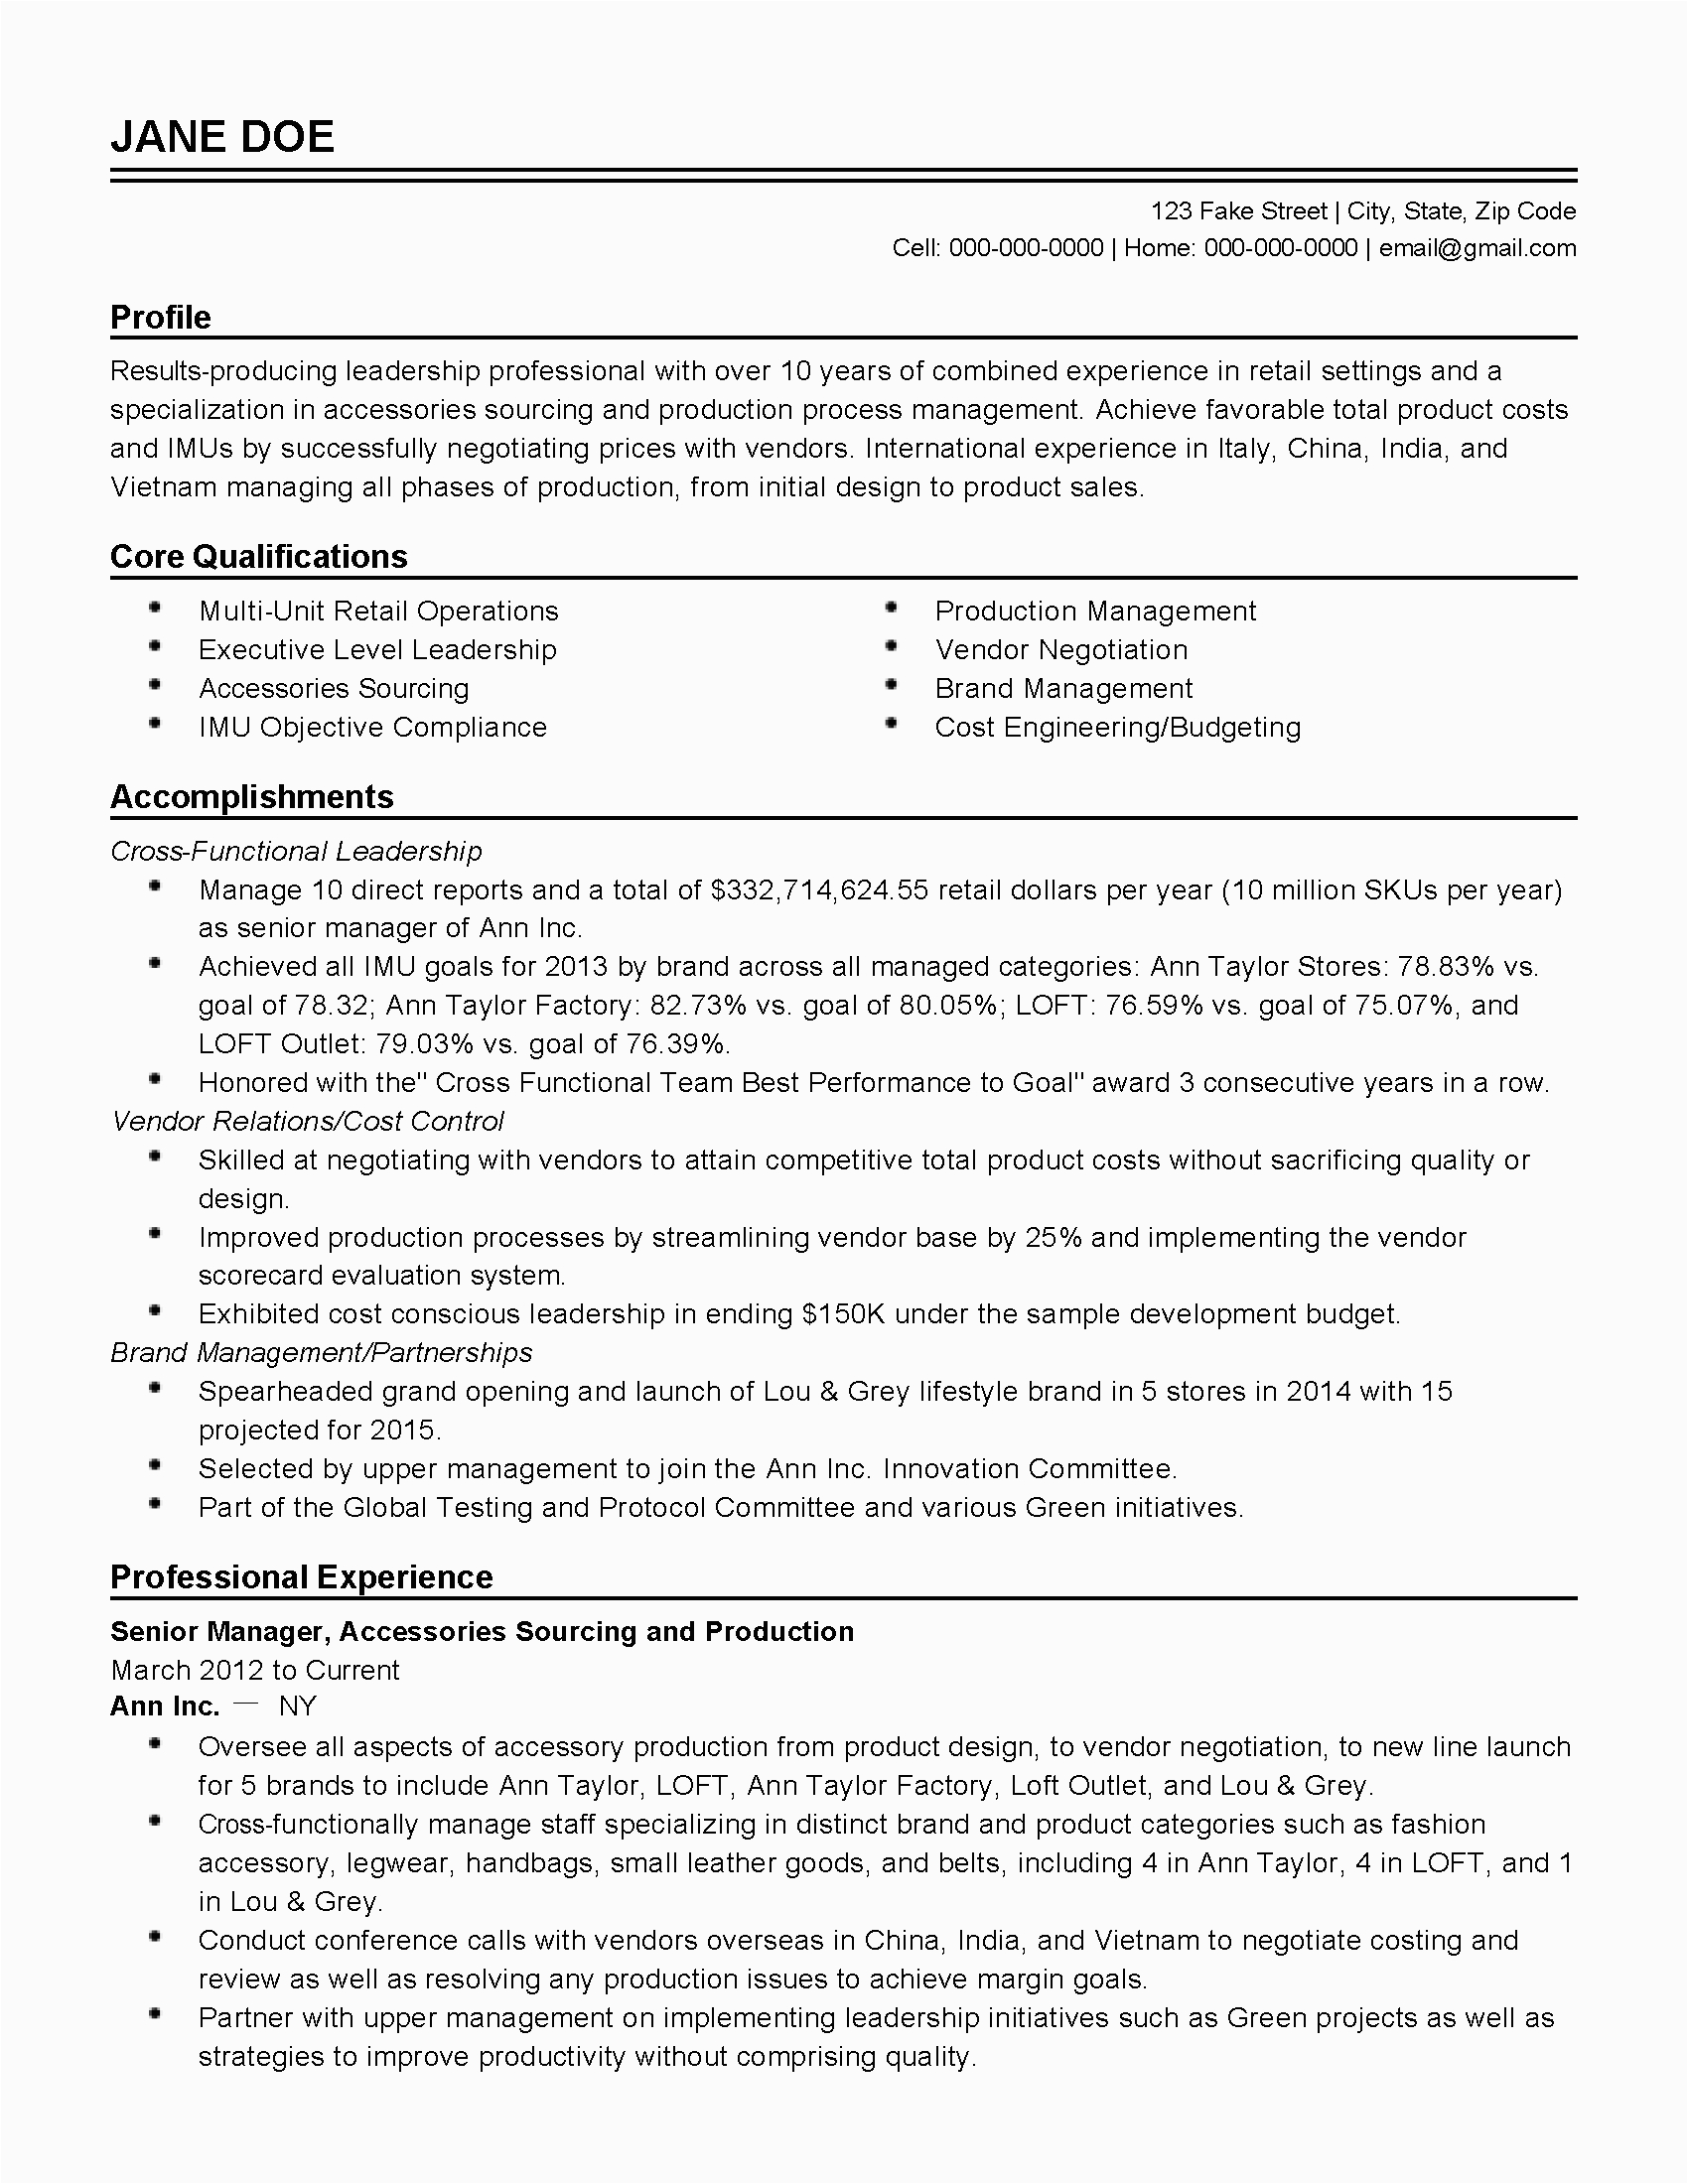 Sample Resume for 10 Years Experience software Engineer 10 Years Experience software Engineer Resume Briefkopf